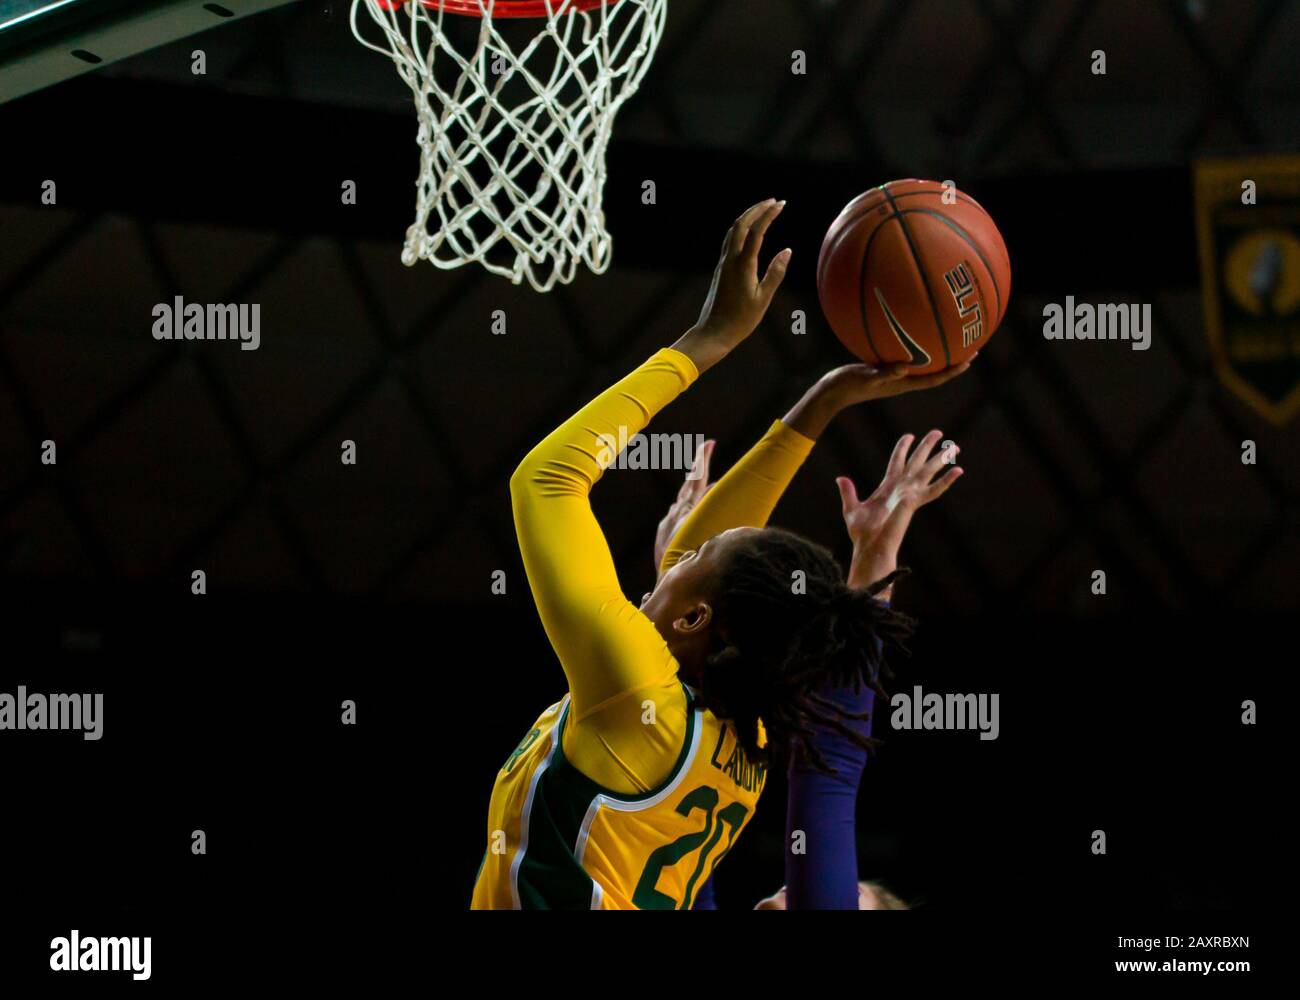 Waco, Texas, USA. 12th Feb, 2020. Baylor Lady Bears guard Juicy Landrum (20) shoots a the ball during the 2nd half of the NCAA Women's Basketball game between Kansas Jayhawks and the Baylor Lady Bears at The Ferrell Center in Waco, Texas. Matthew Lynch/CSM/Alamy Live News Stock Photo